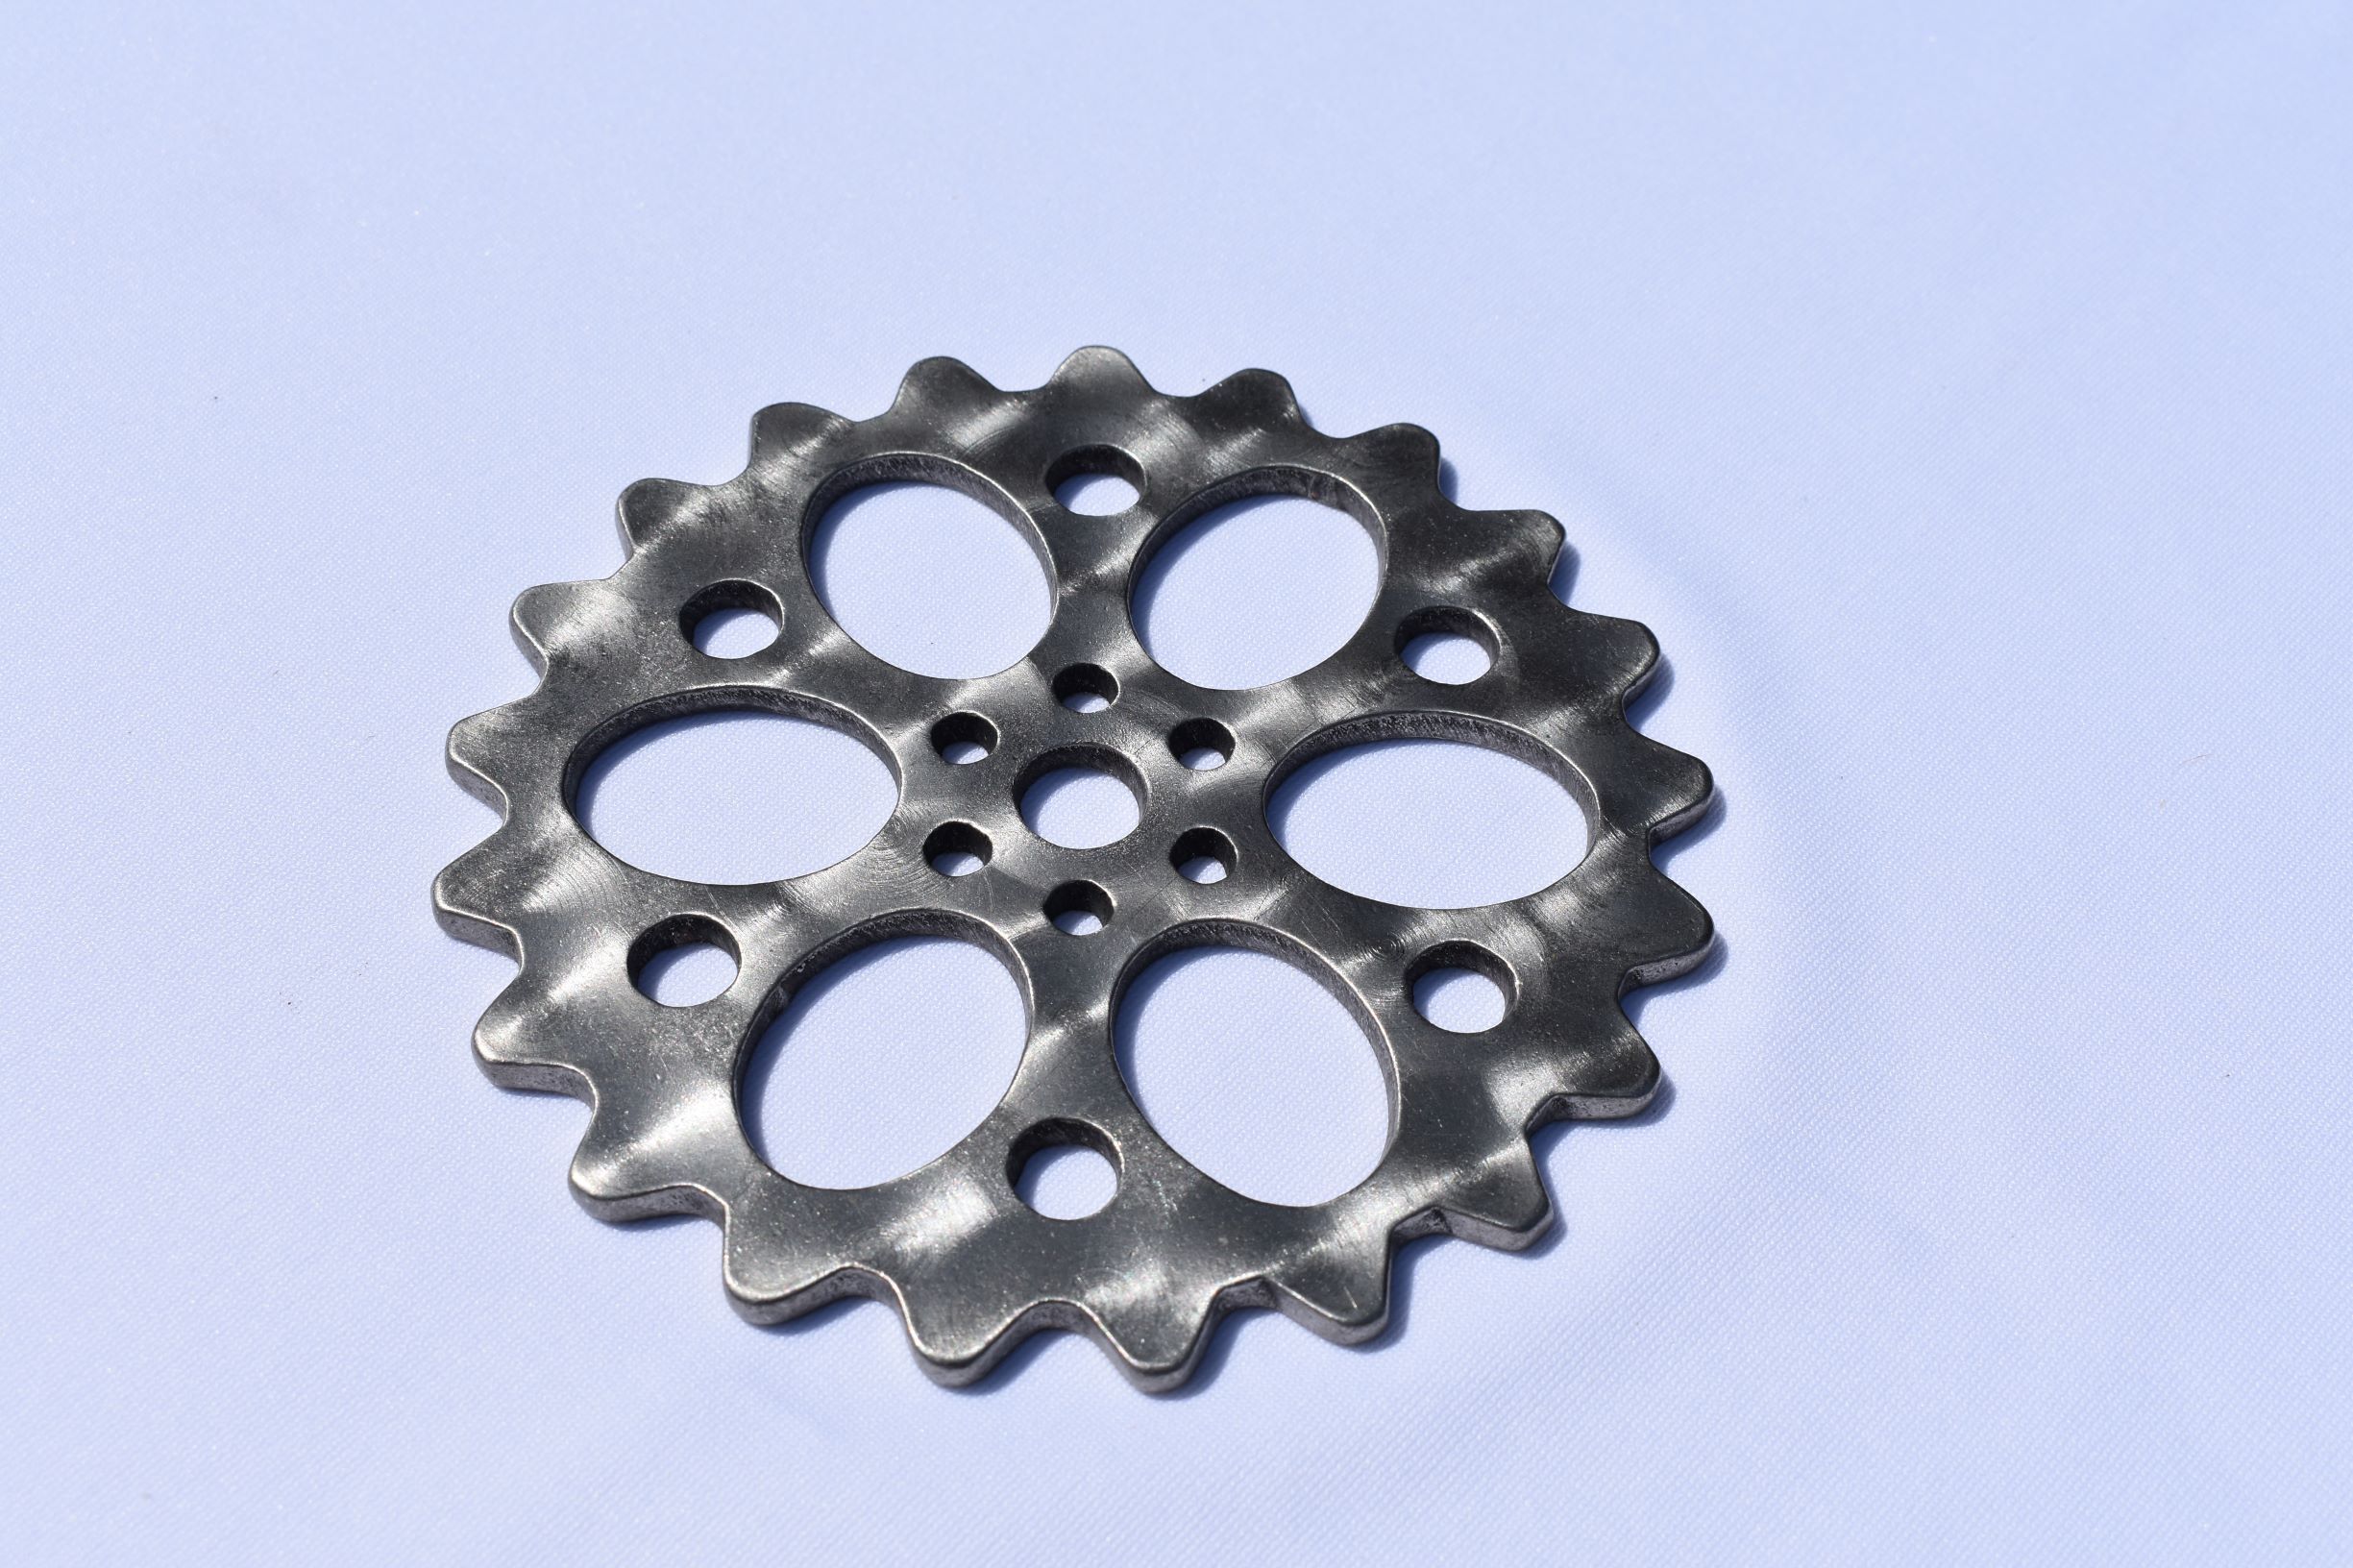 Coasters - Stainless Steel Gears Third Shift Fabrication Extra Large 